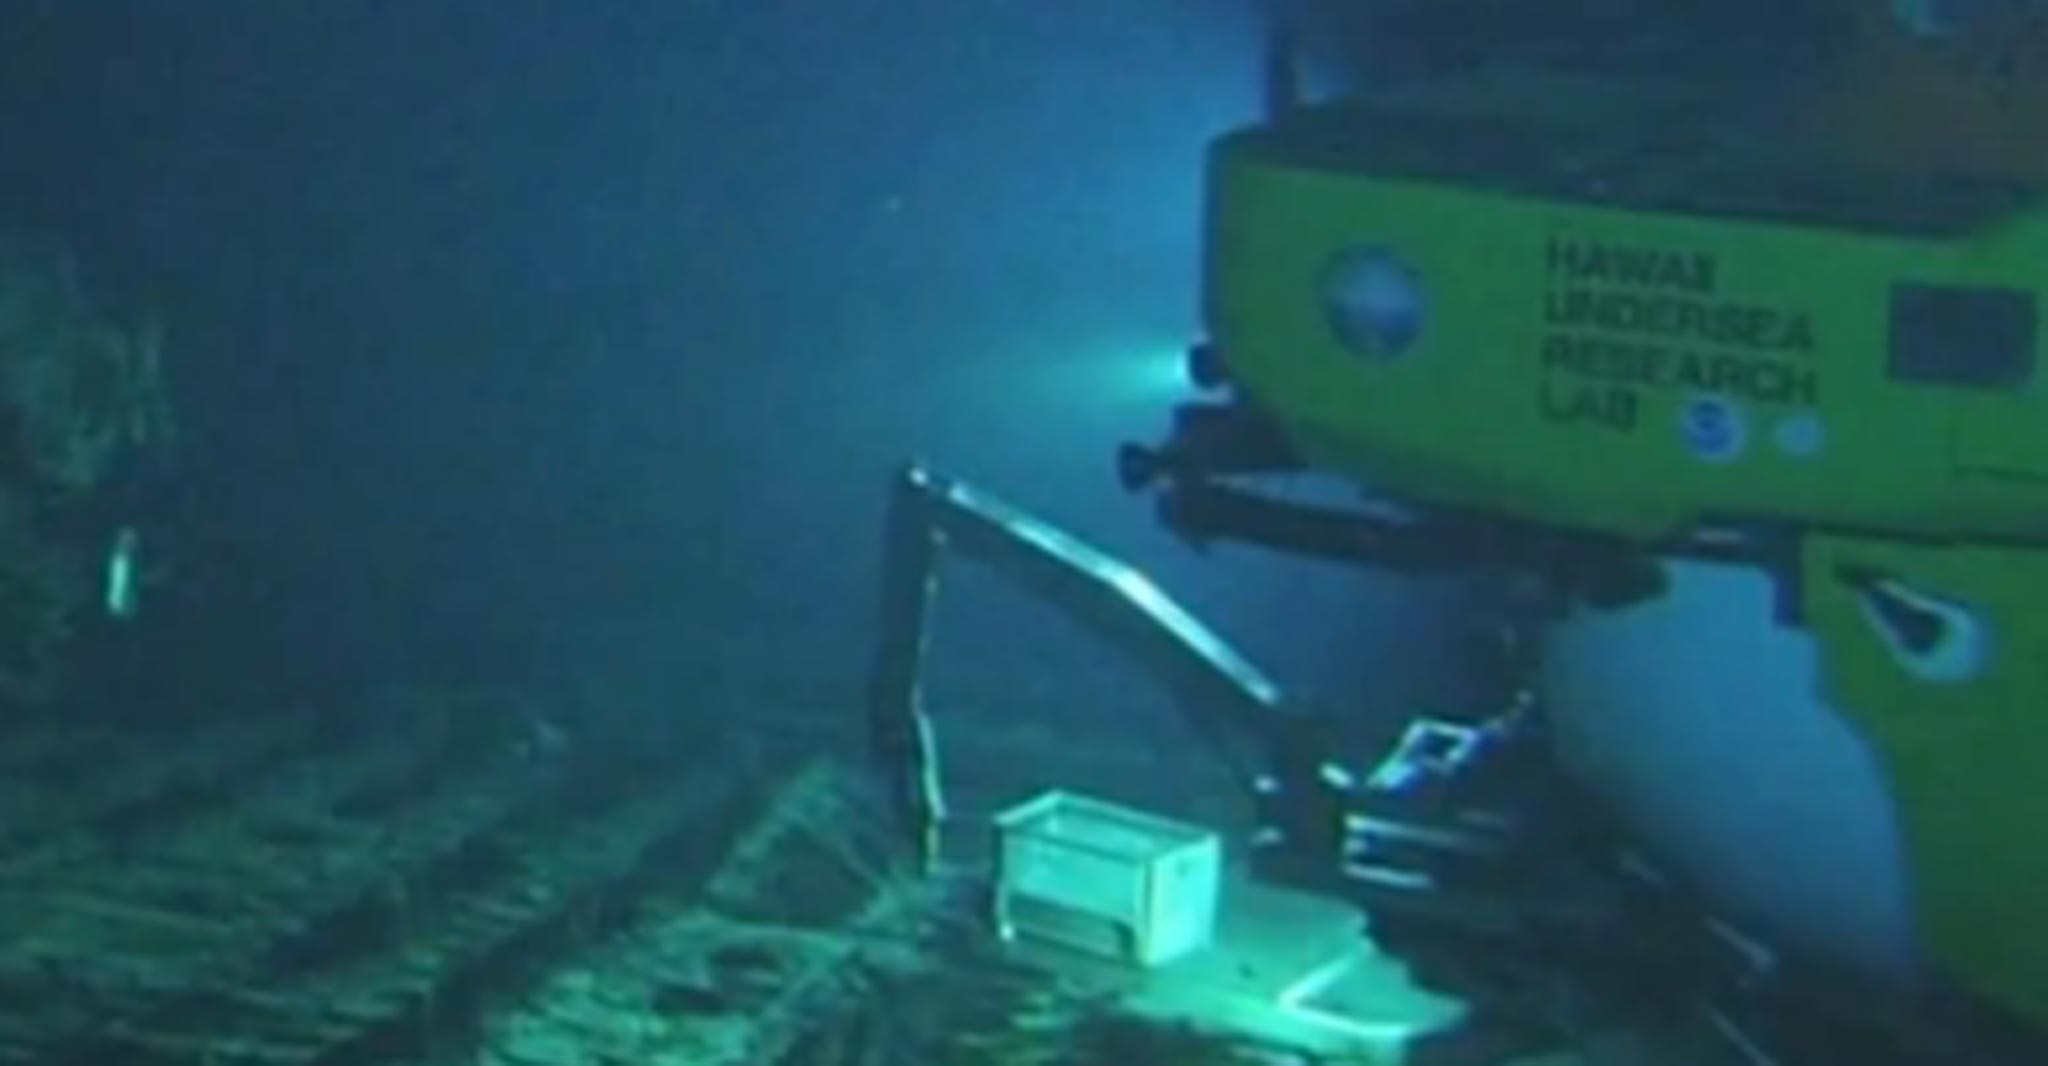 The mystery of the a Japanese submarine missing since 1946 has now been solved with this discovery